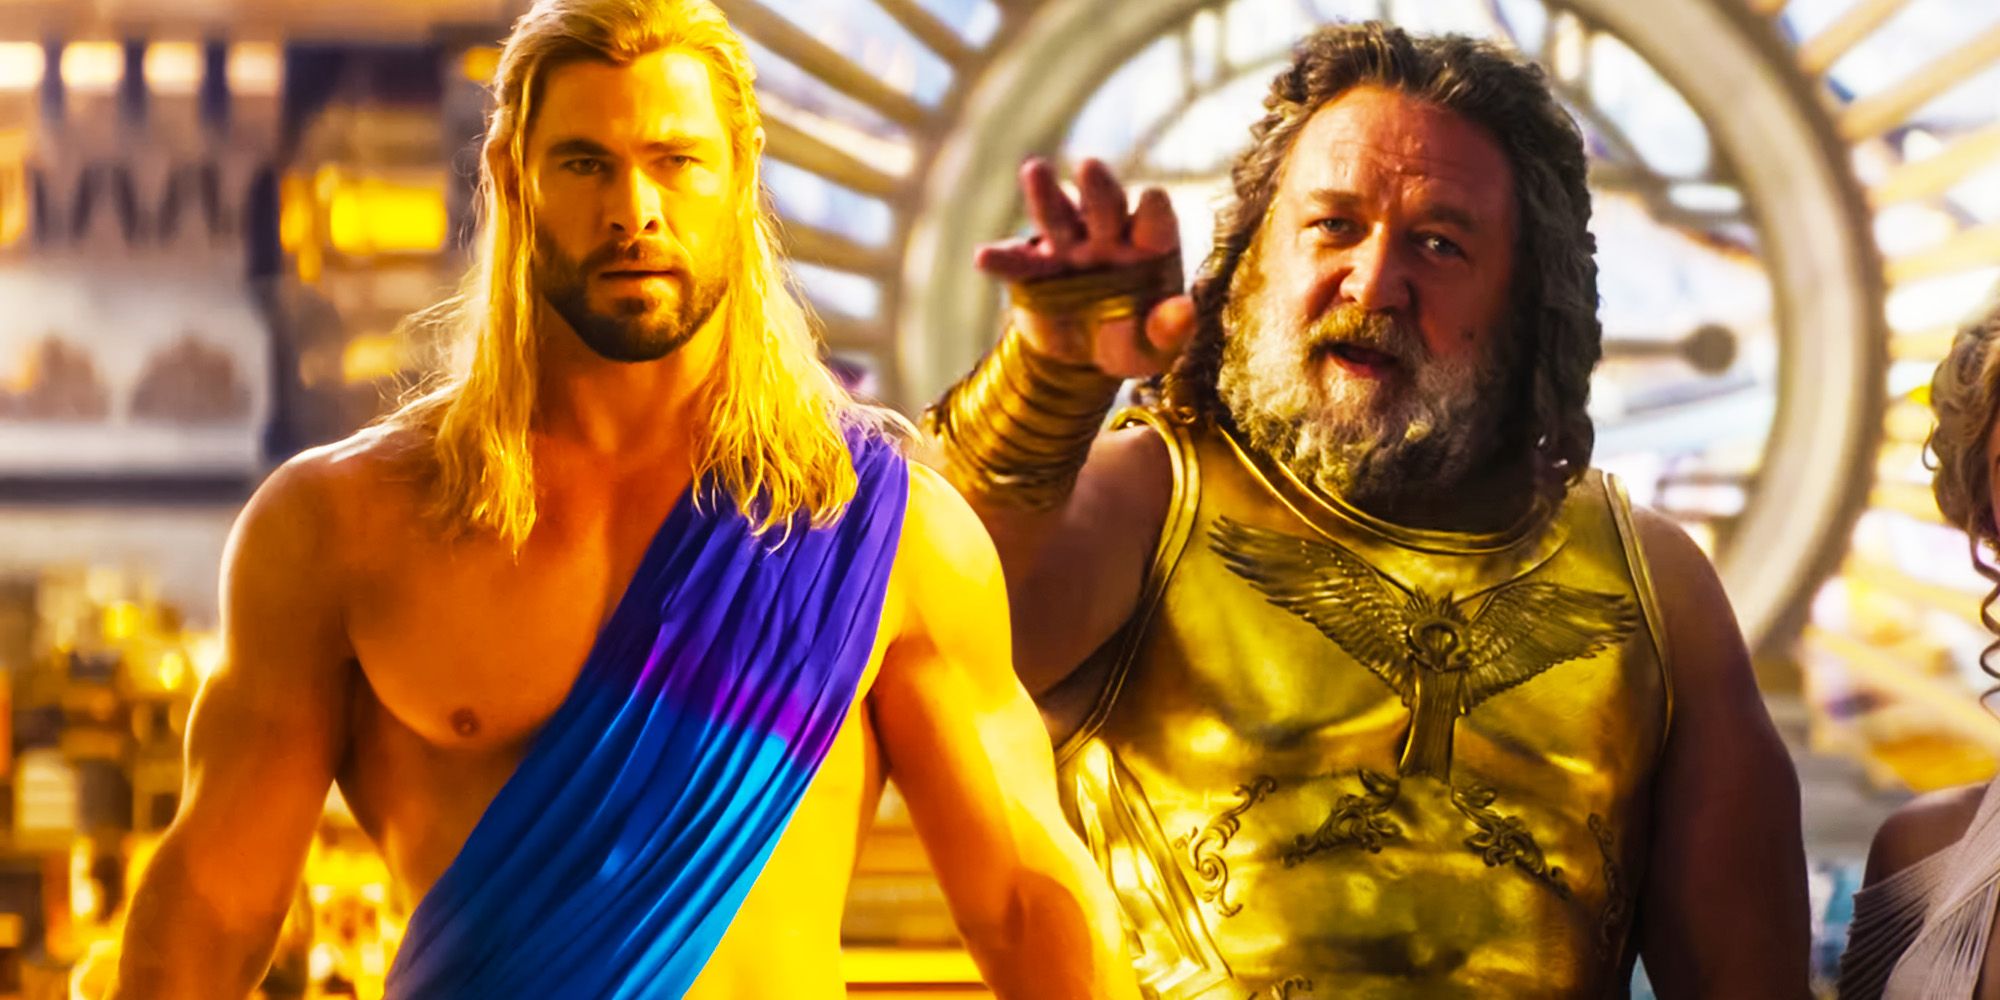 Thor love and thunder russell Crowe Zeus twist